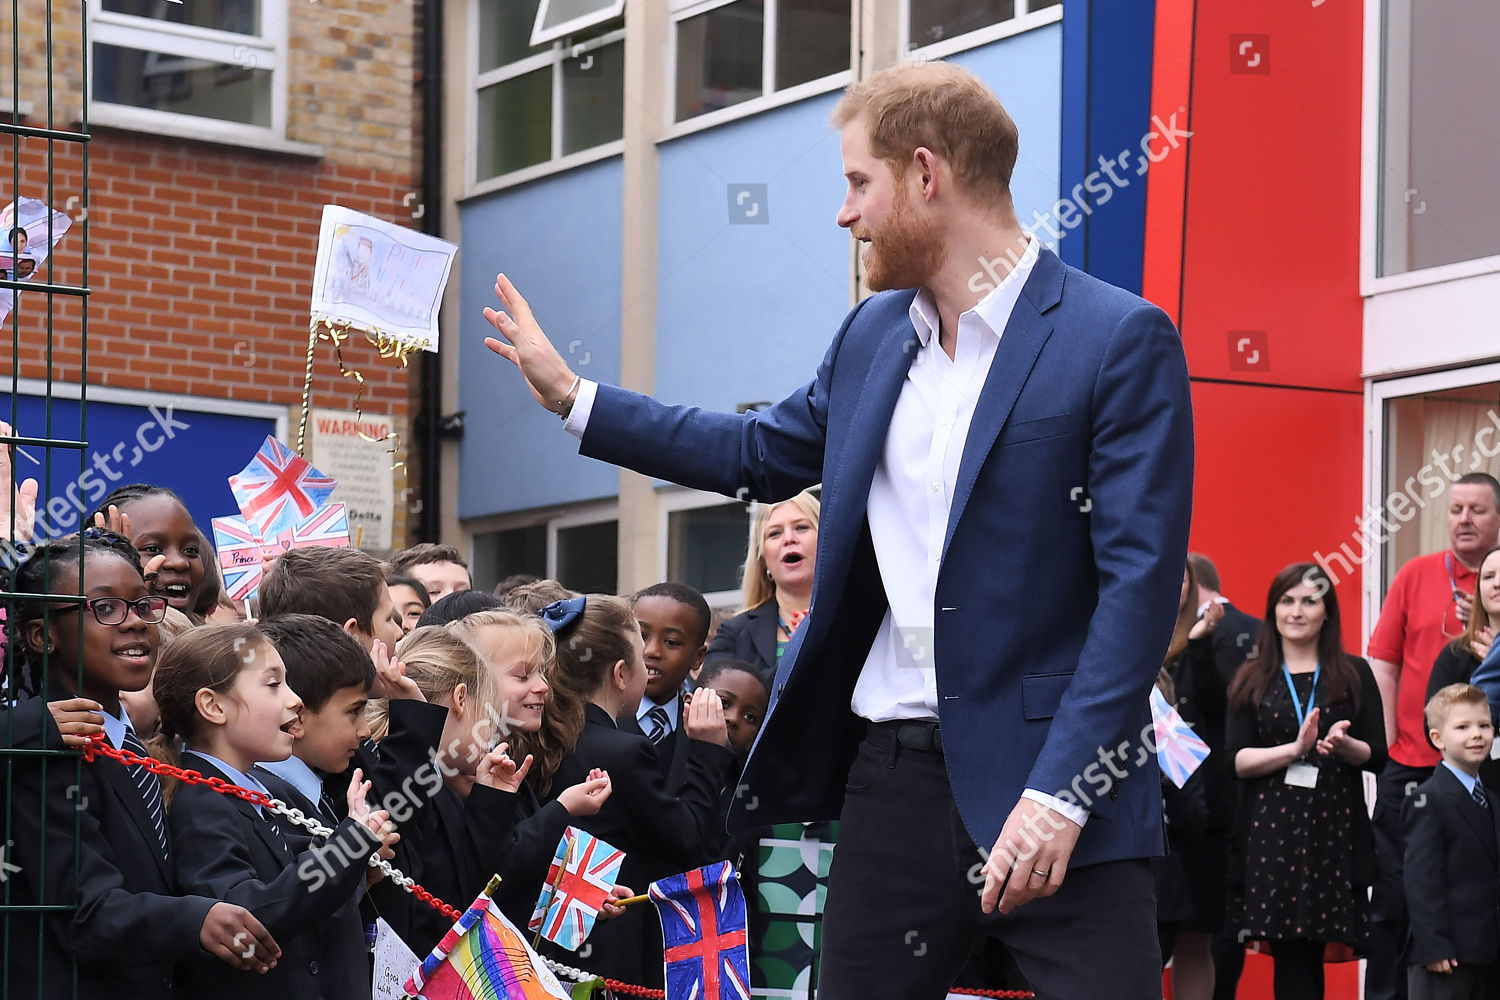 prince-harry-visits-st-vincents-catholic-primary-school-for-commonwealth-canopy-and-woodland-trust-tree-planting-ceremony-london-uk-shutterstock-editorial-10160984ao.jpg